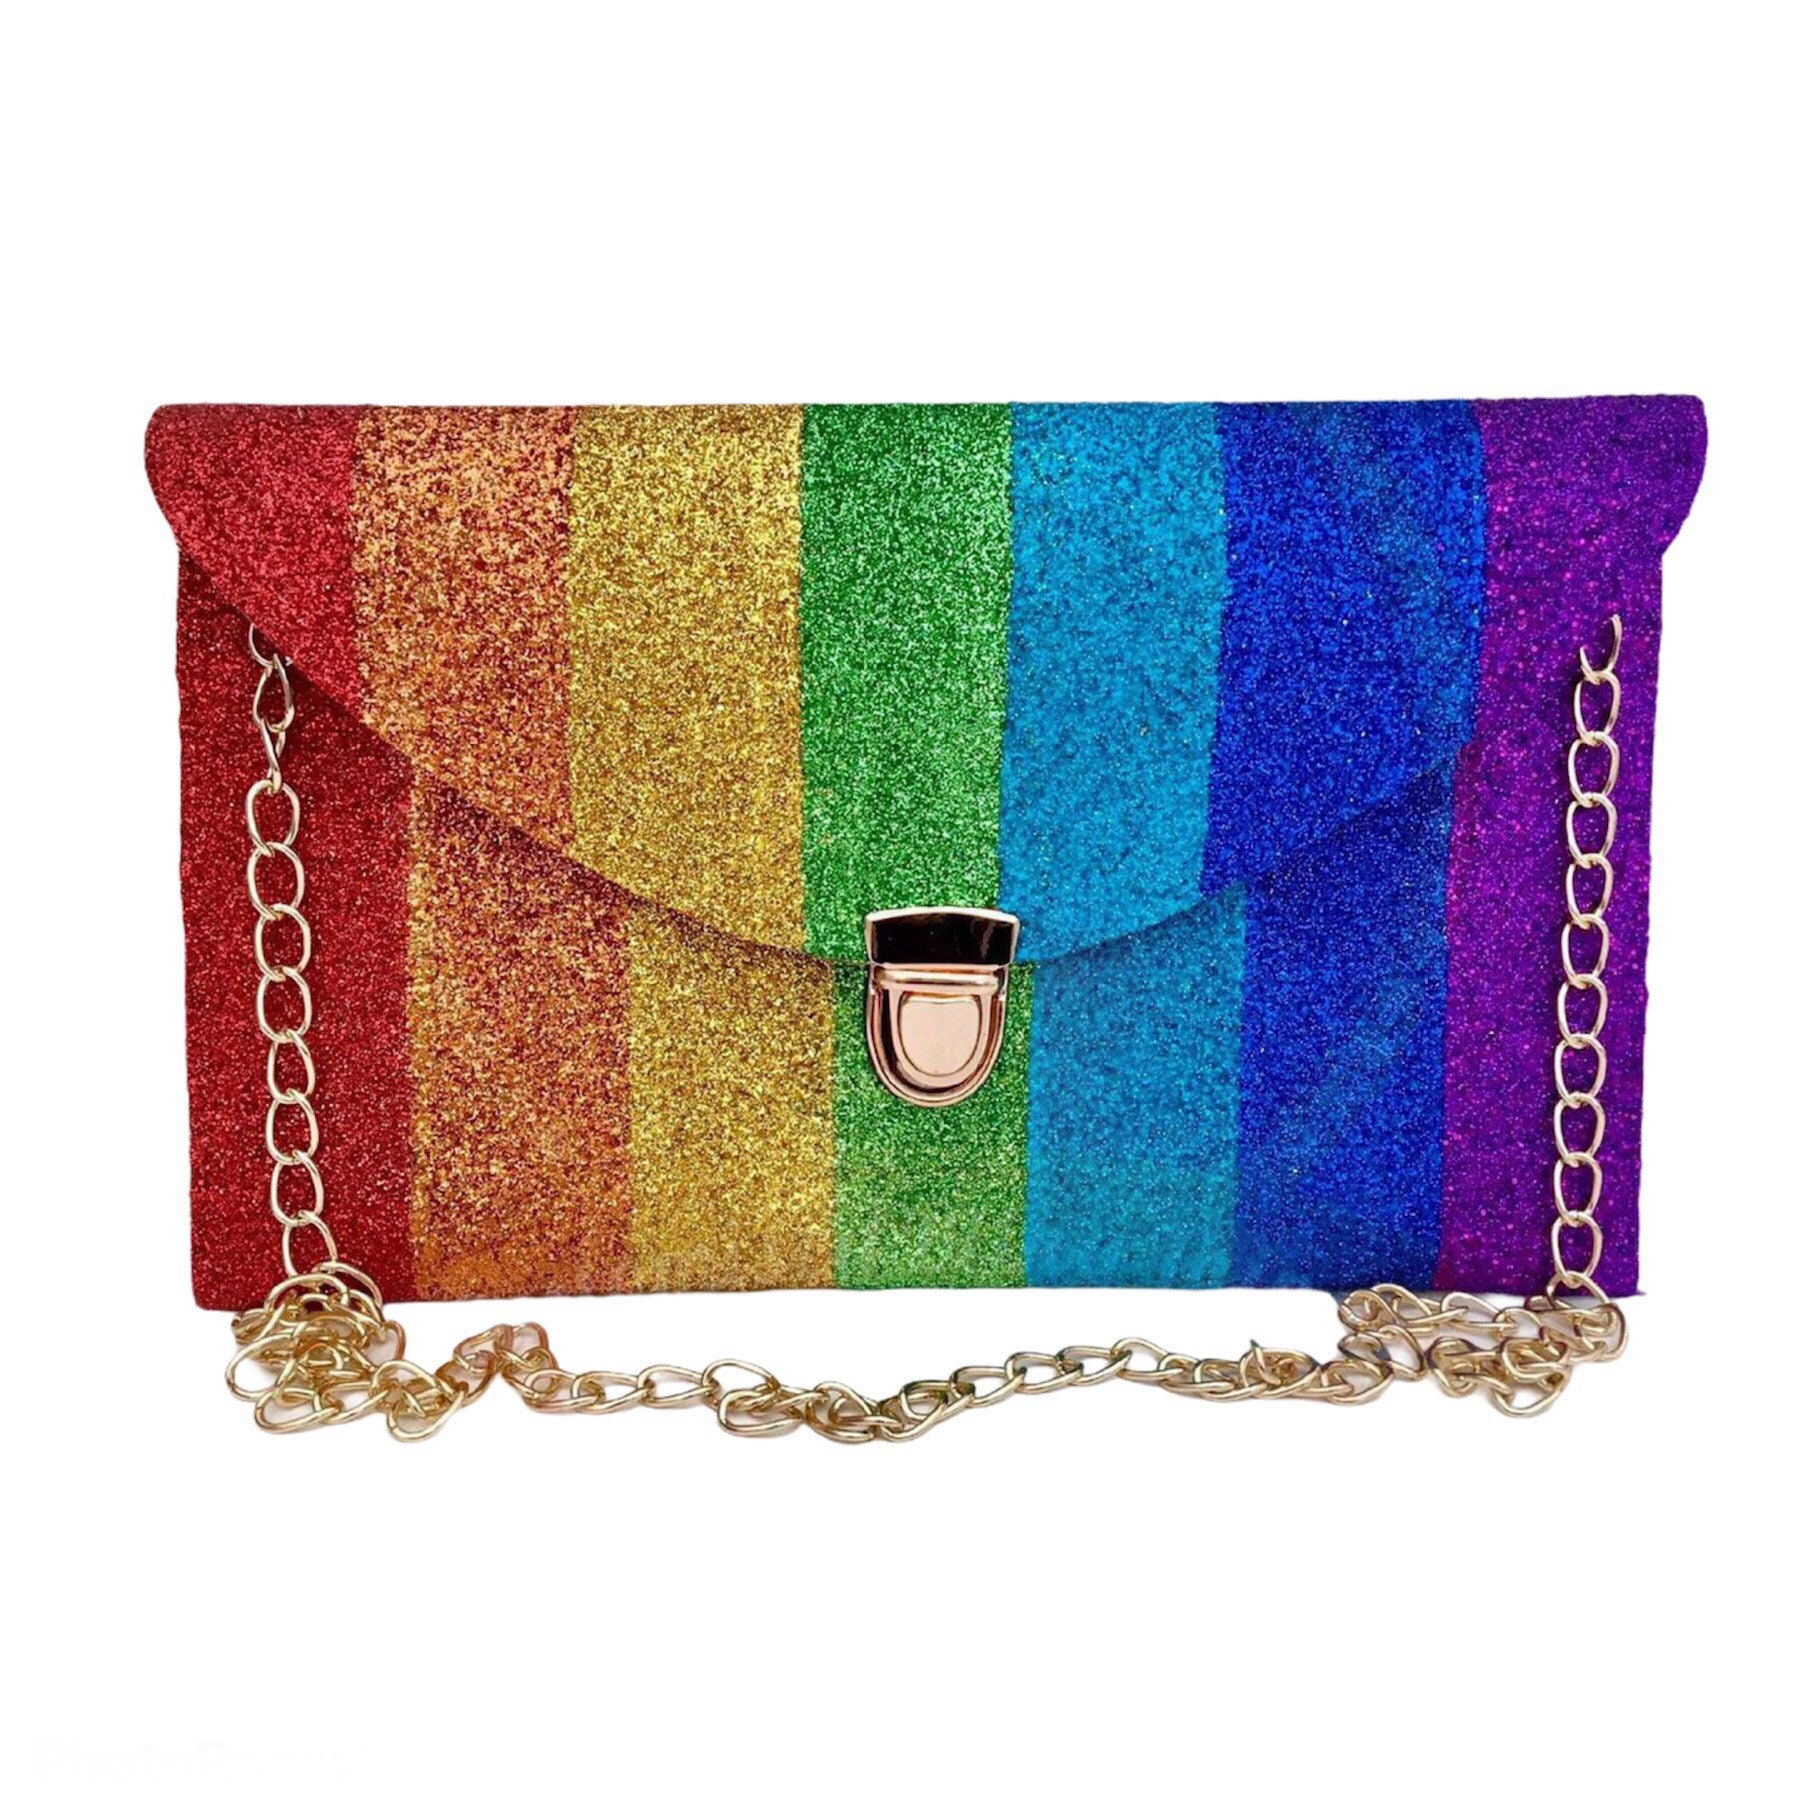 Clutches, Personalised Accessories, Clothing & Homeware